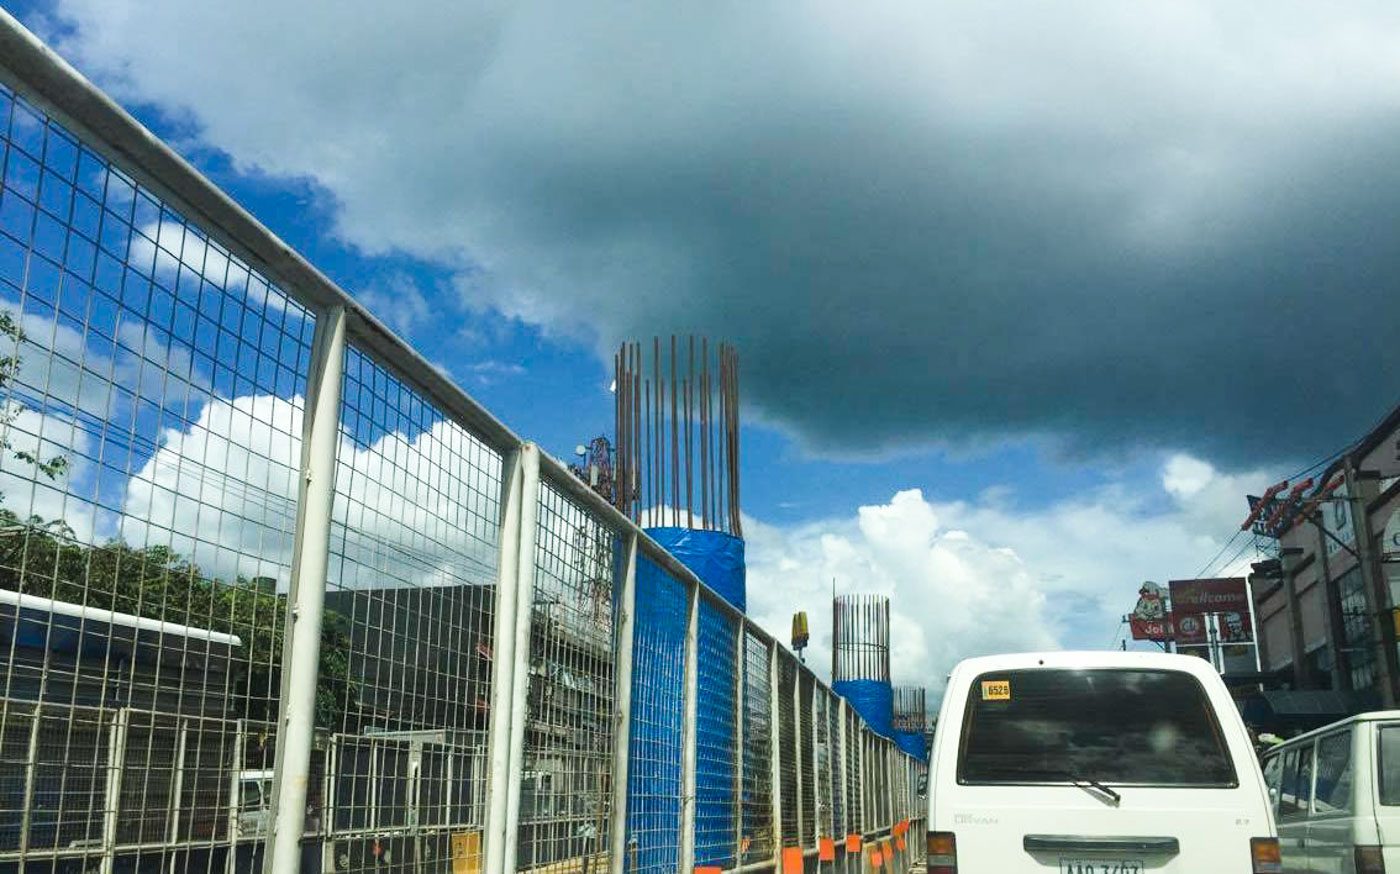 Motorists told to avoid Quirino Highway due to MRT7 construction